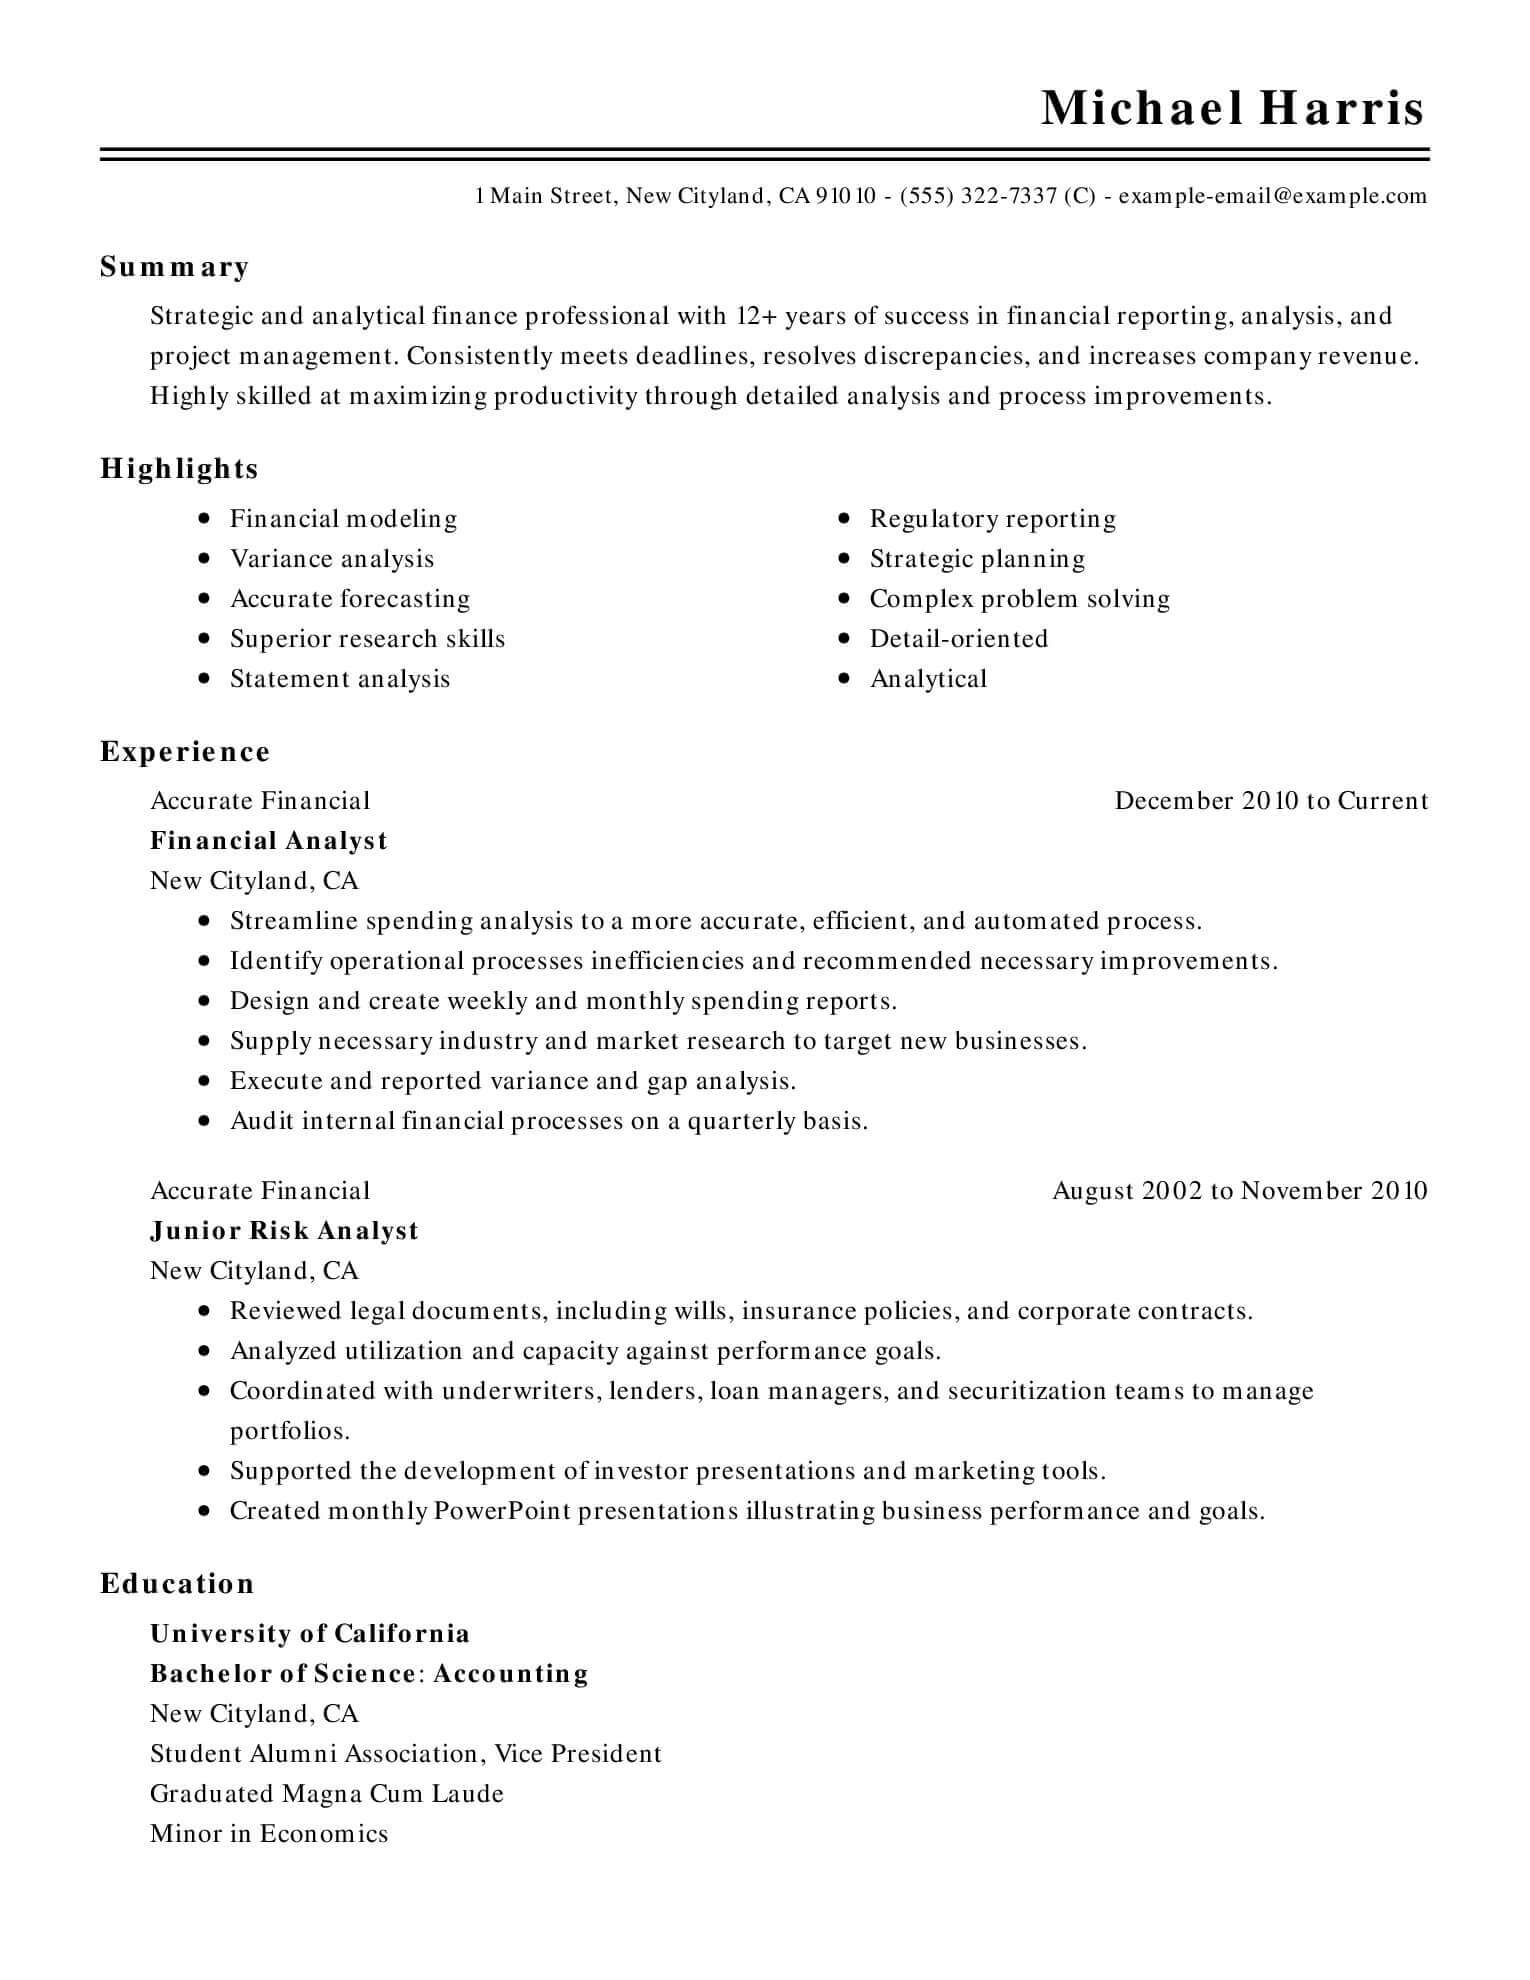 15 Of The Best Resume Templates For Microsoft Word Office Intended For Resume Templates Word 2010